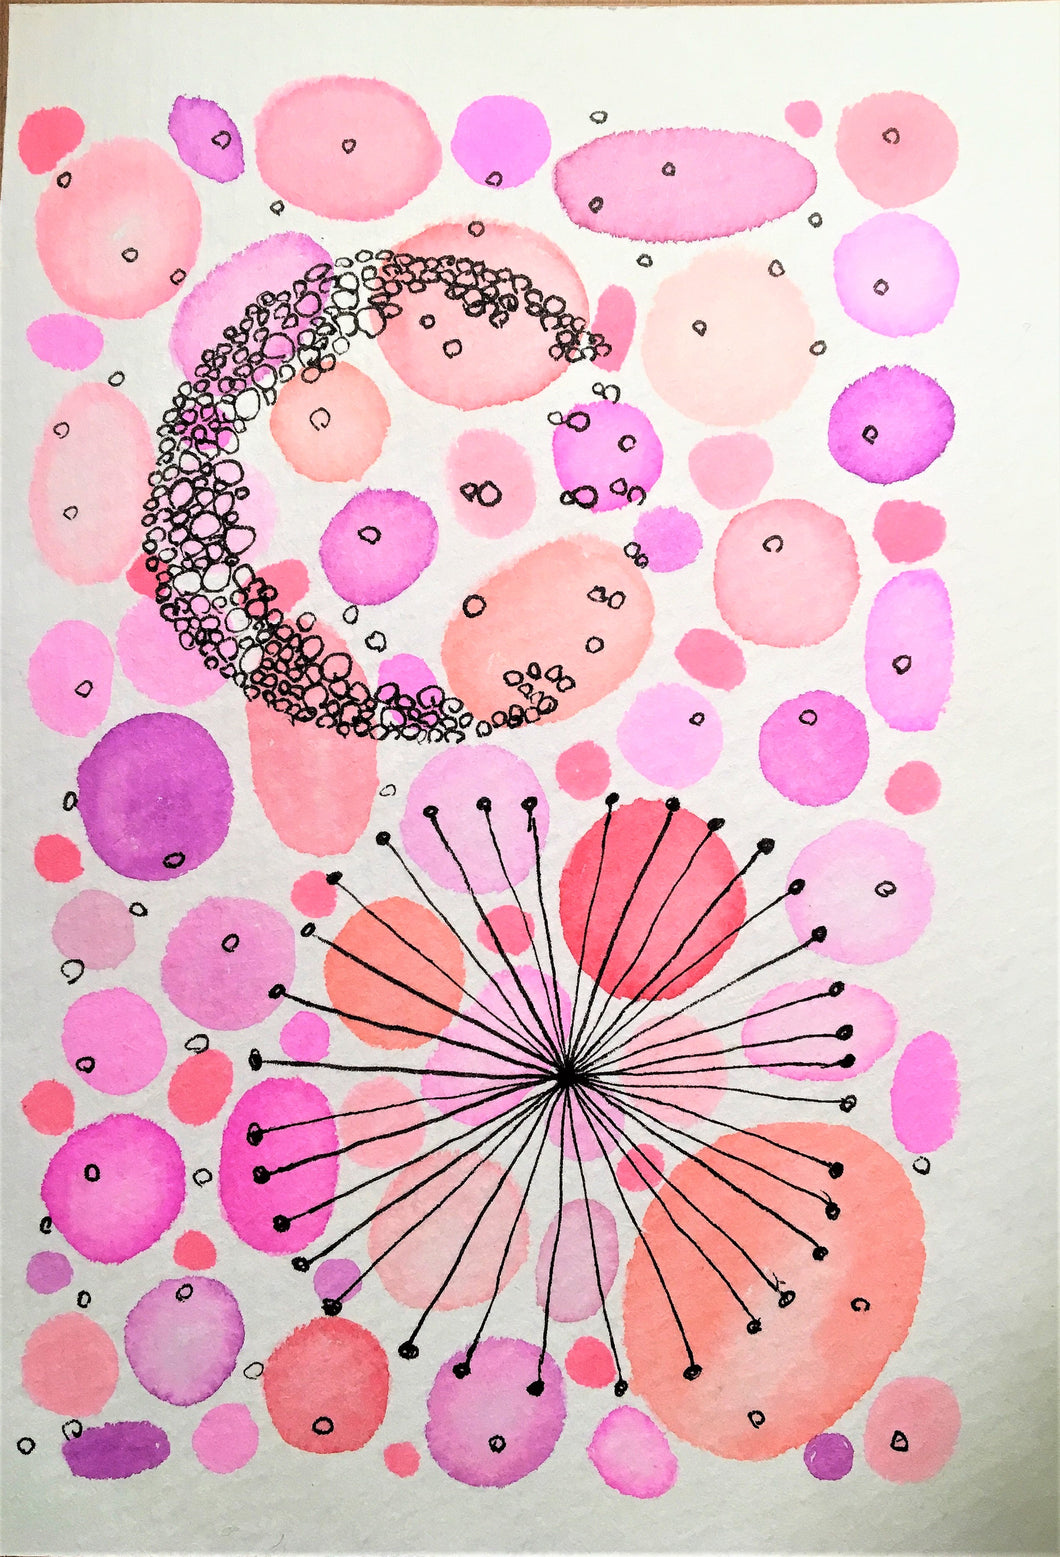 Handpainted Watercolour Greeting Card - Abstract Star and Bubble Design - eDgE dEsiGn London